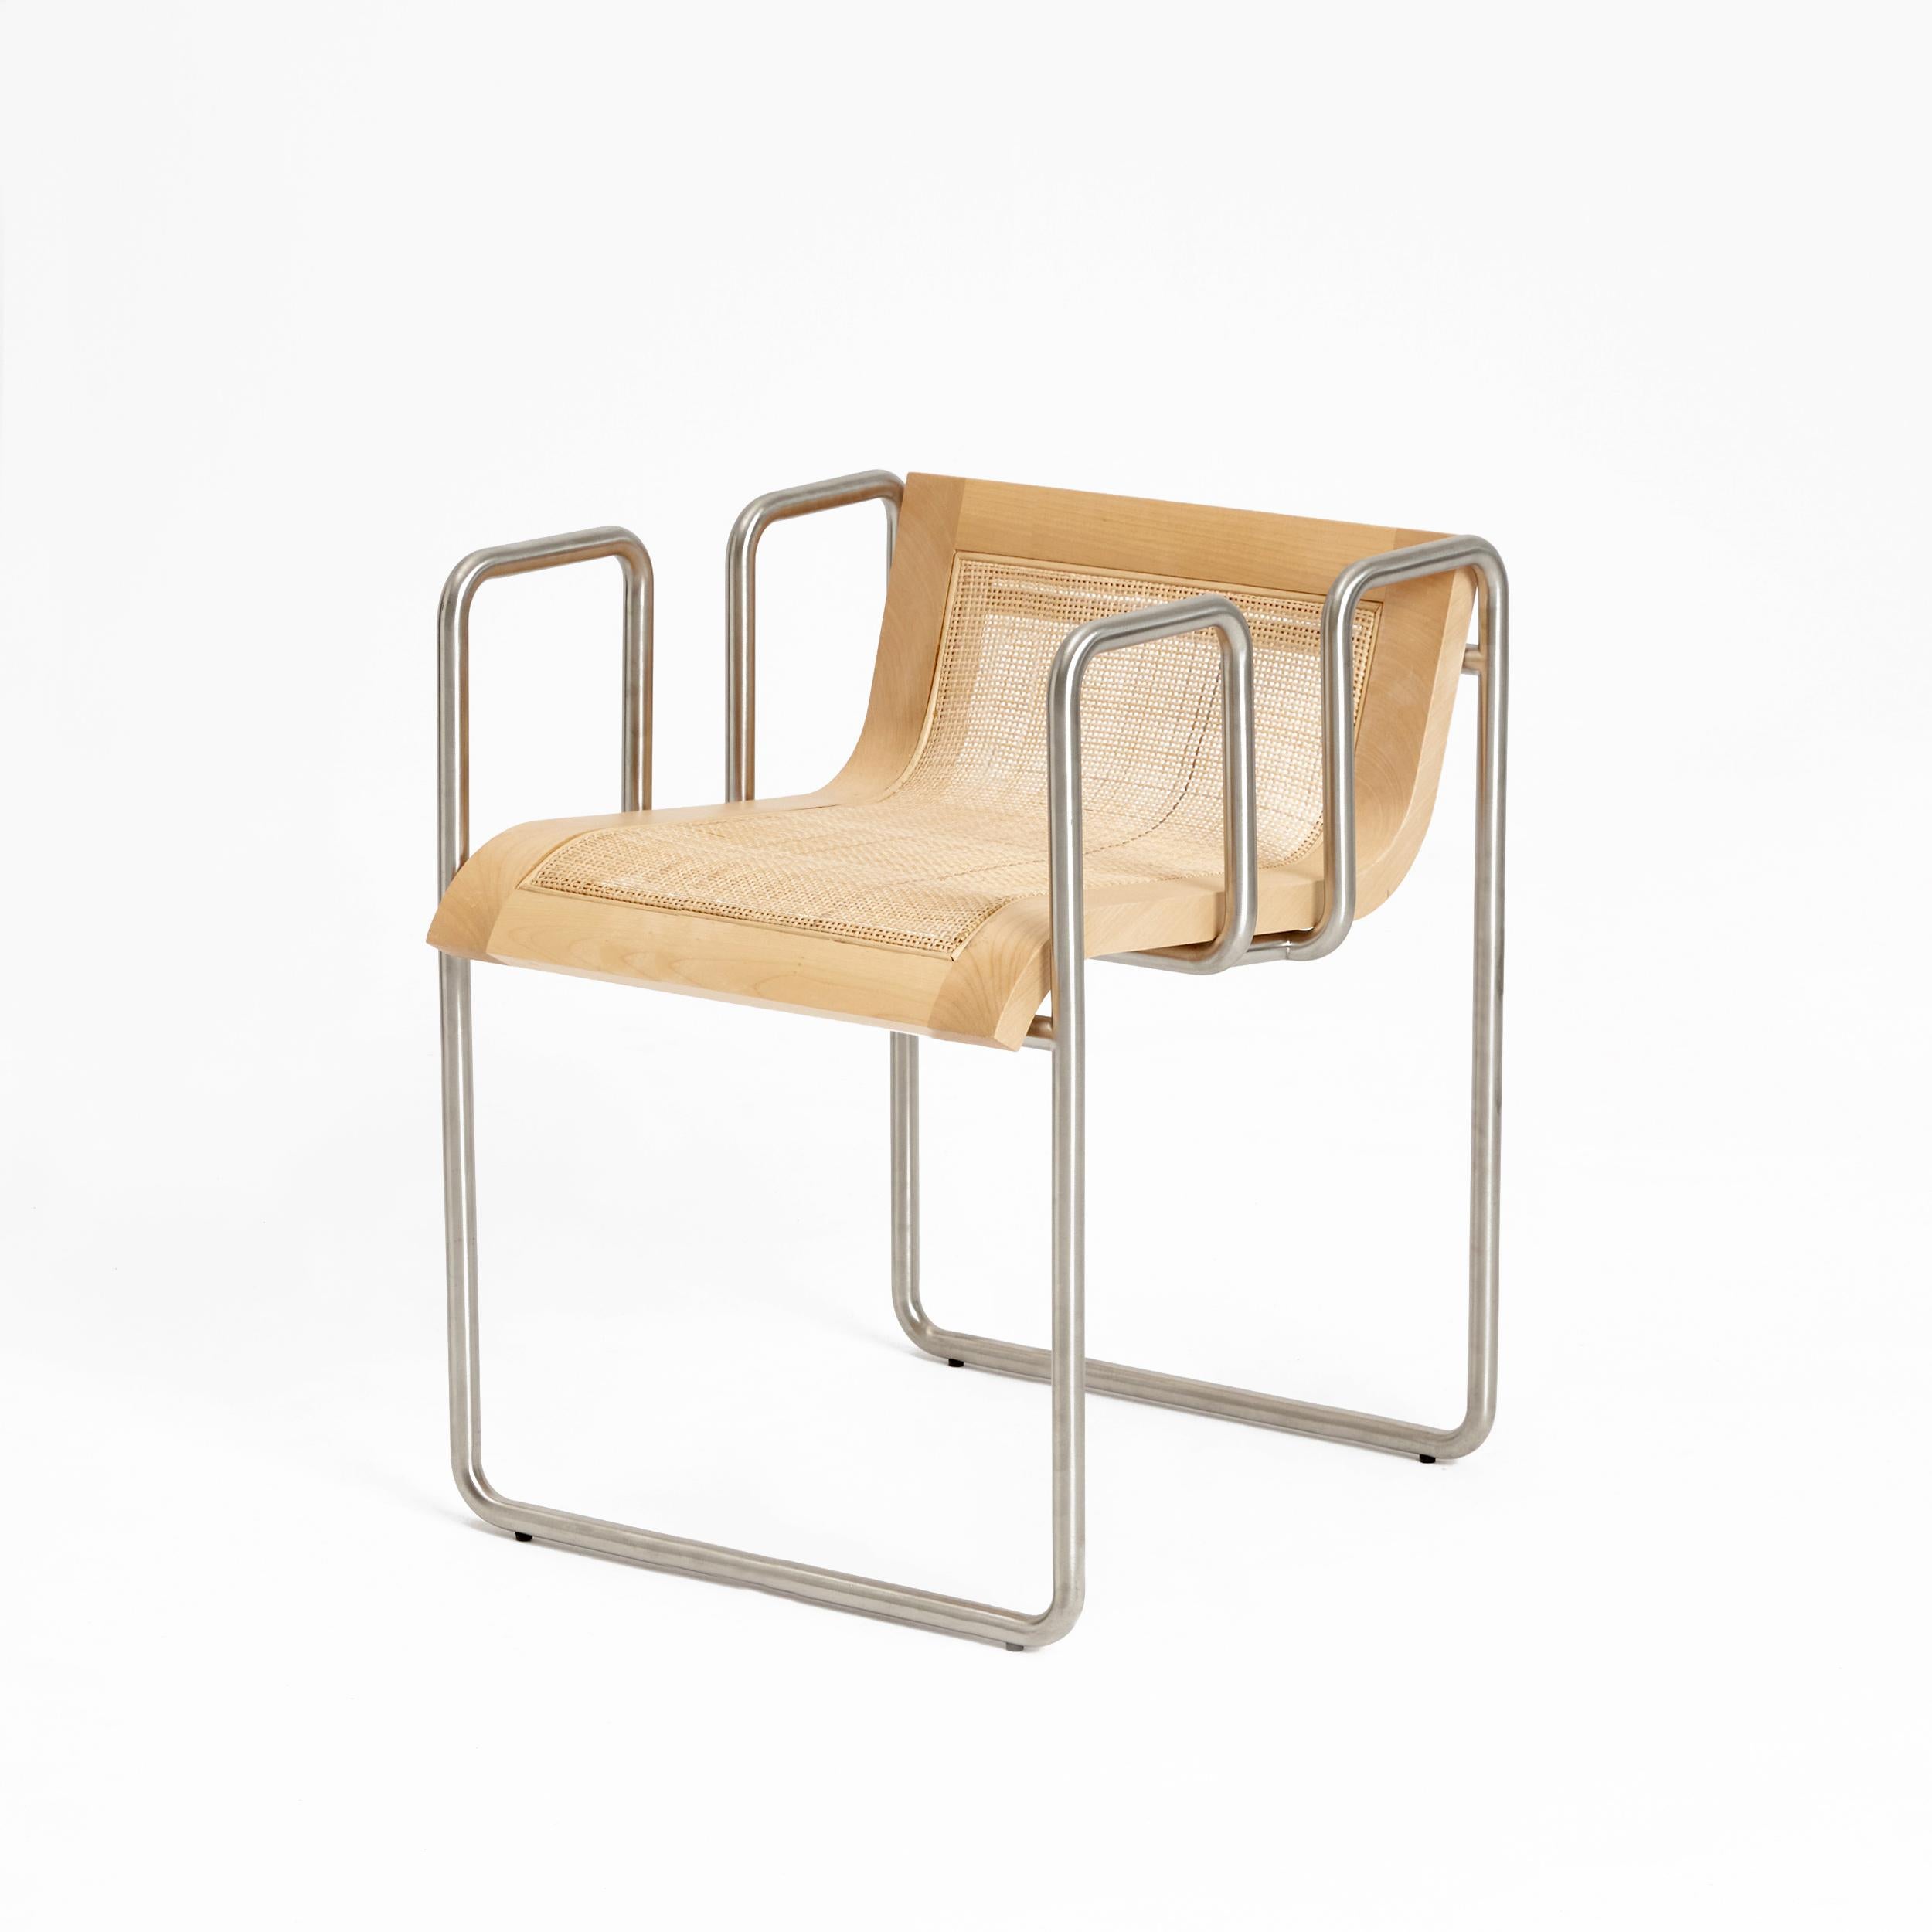 Take a seat in natural by Project 213A
Dimensions: D 53 x W 48.5 x H 61.5 cm
Materials: Wood, metal.

The metal loops converge elegantly into the middle with the frame embracing the wooden seat.
The seat features an elegant metal frame engineered to